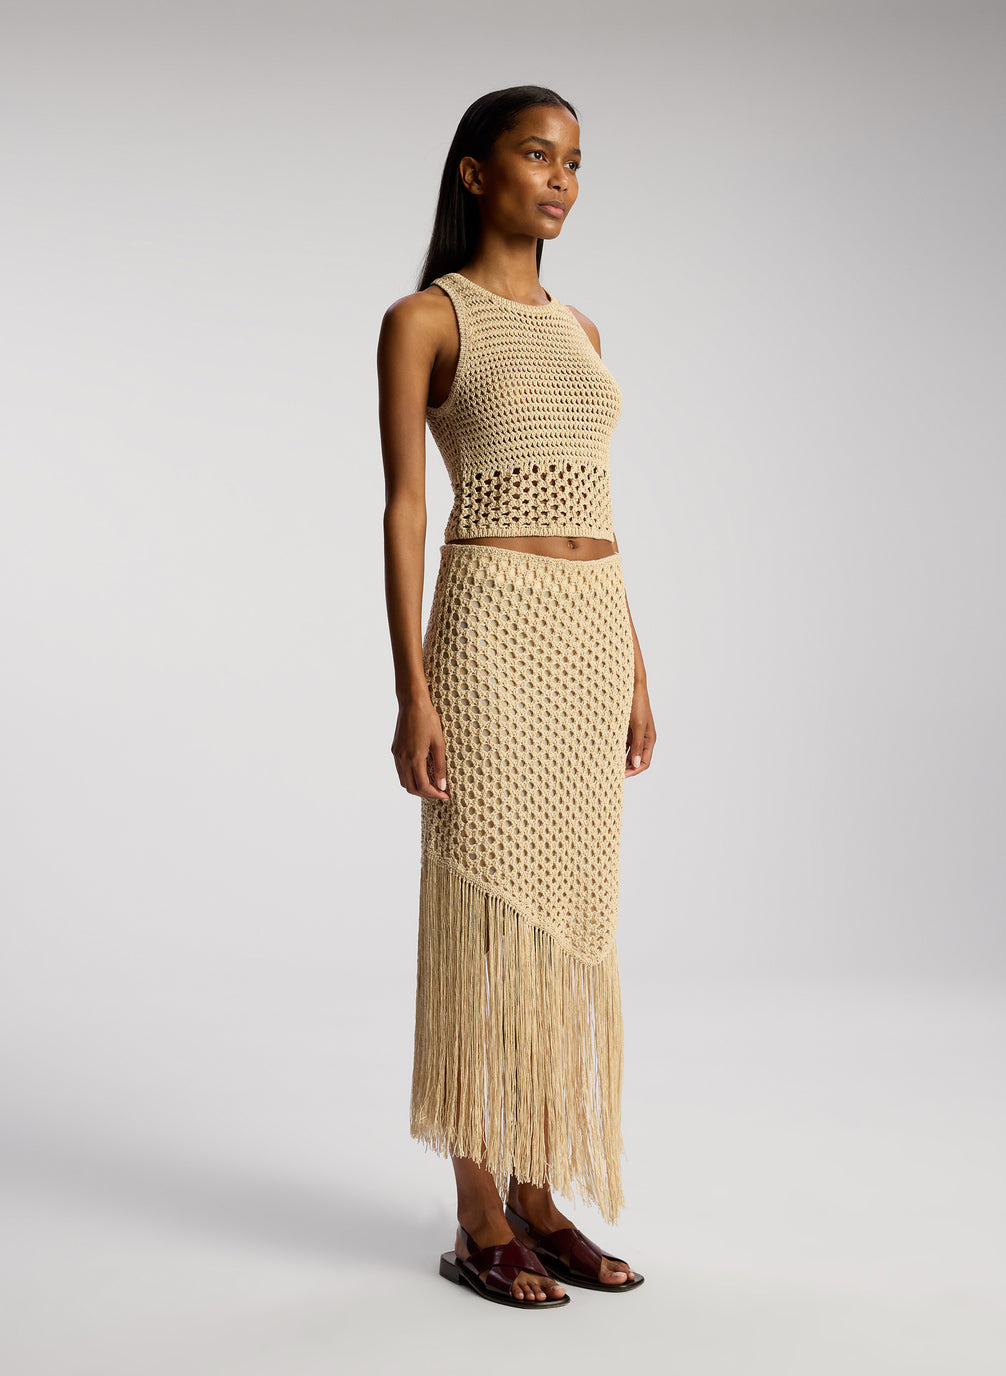 side view of woman wearing tan crochet top and skirt set